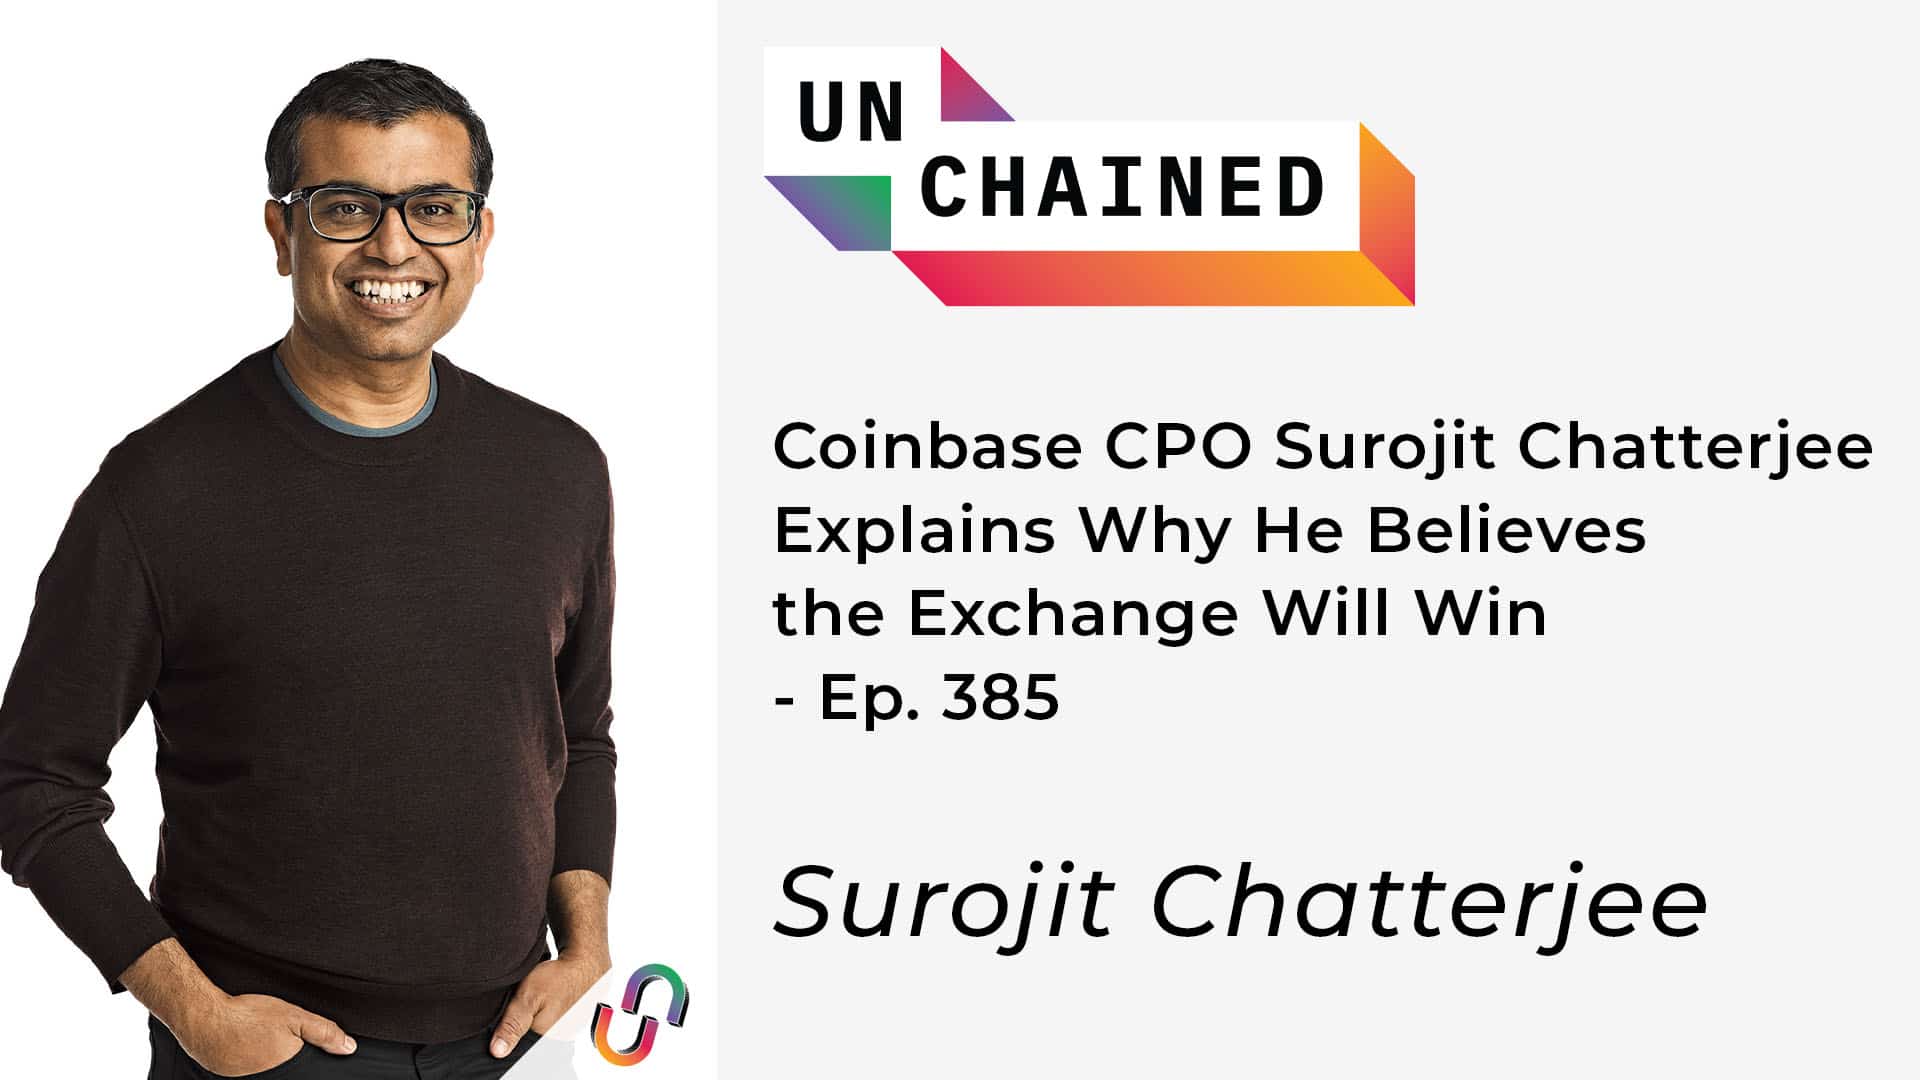 Coinbase CPO Surojit Chatterjee Explains Why He Believes the Exchange Will Win- Ep. 385